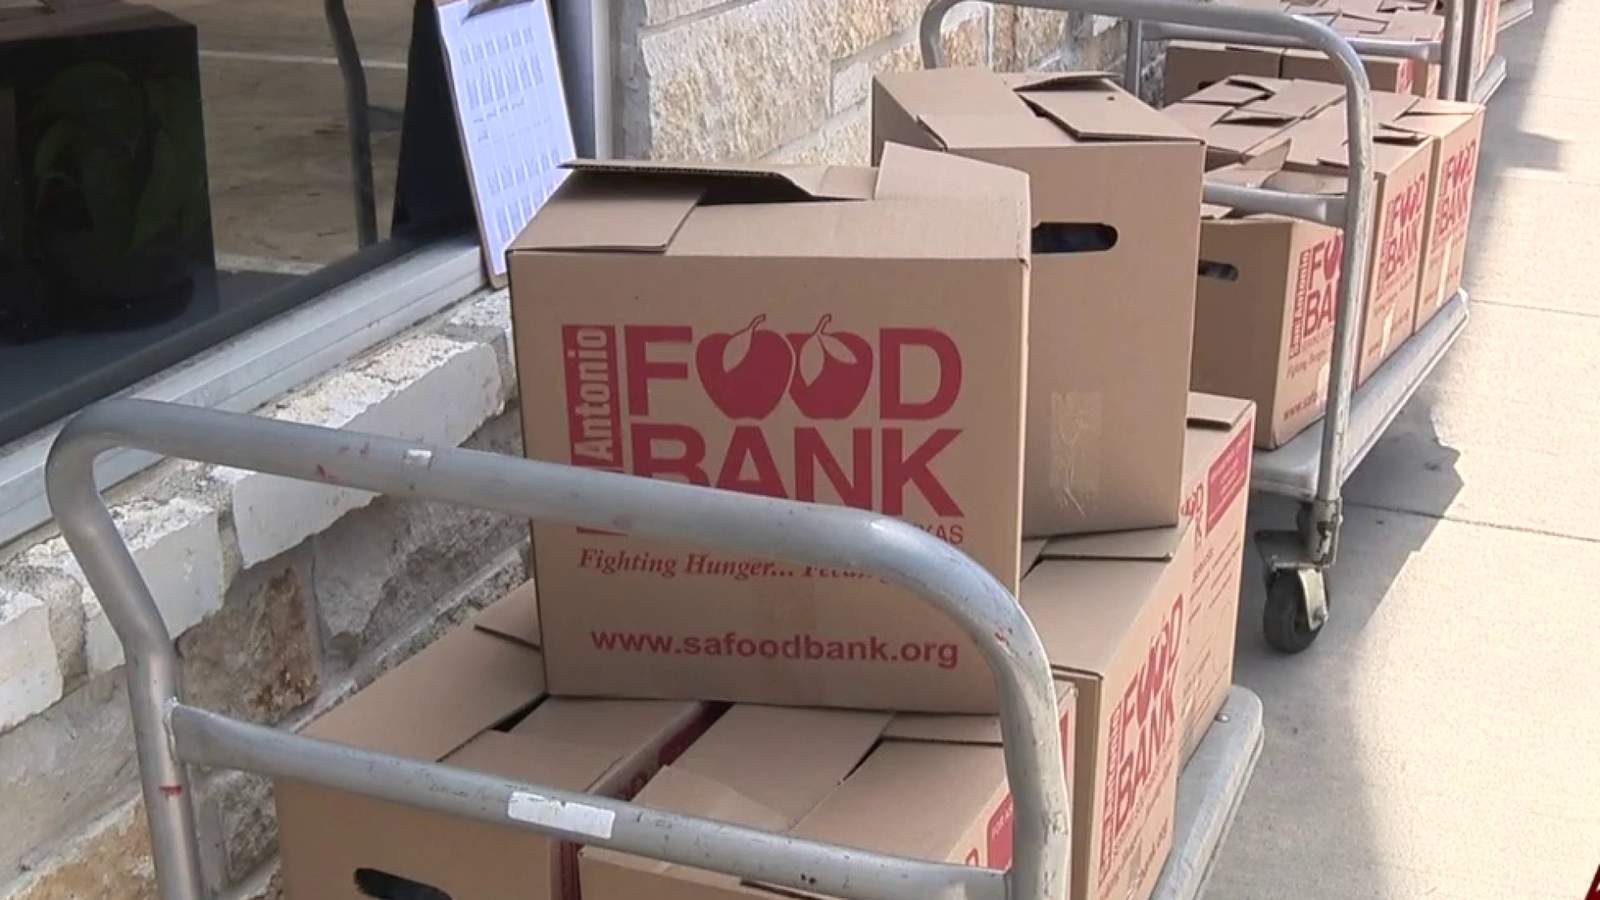 Five San Antonio Food Bank employees test positive for COVID-19, CEO confirms